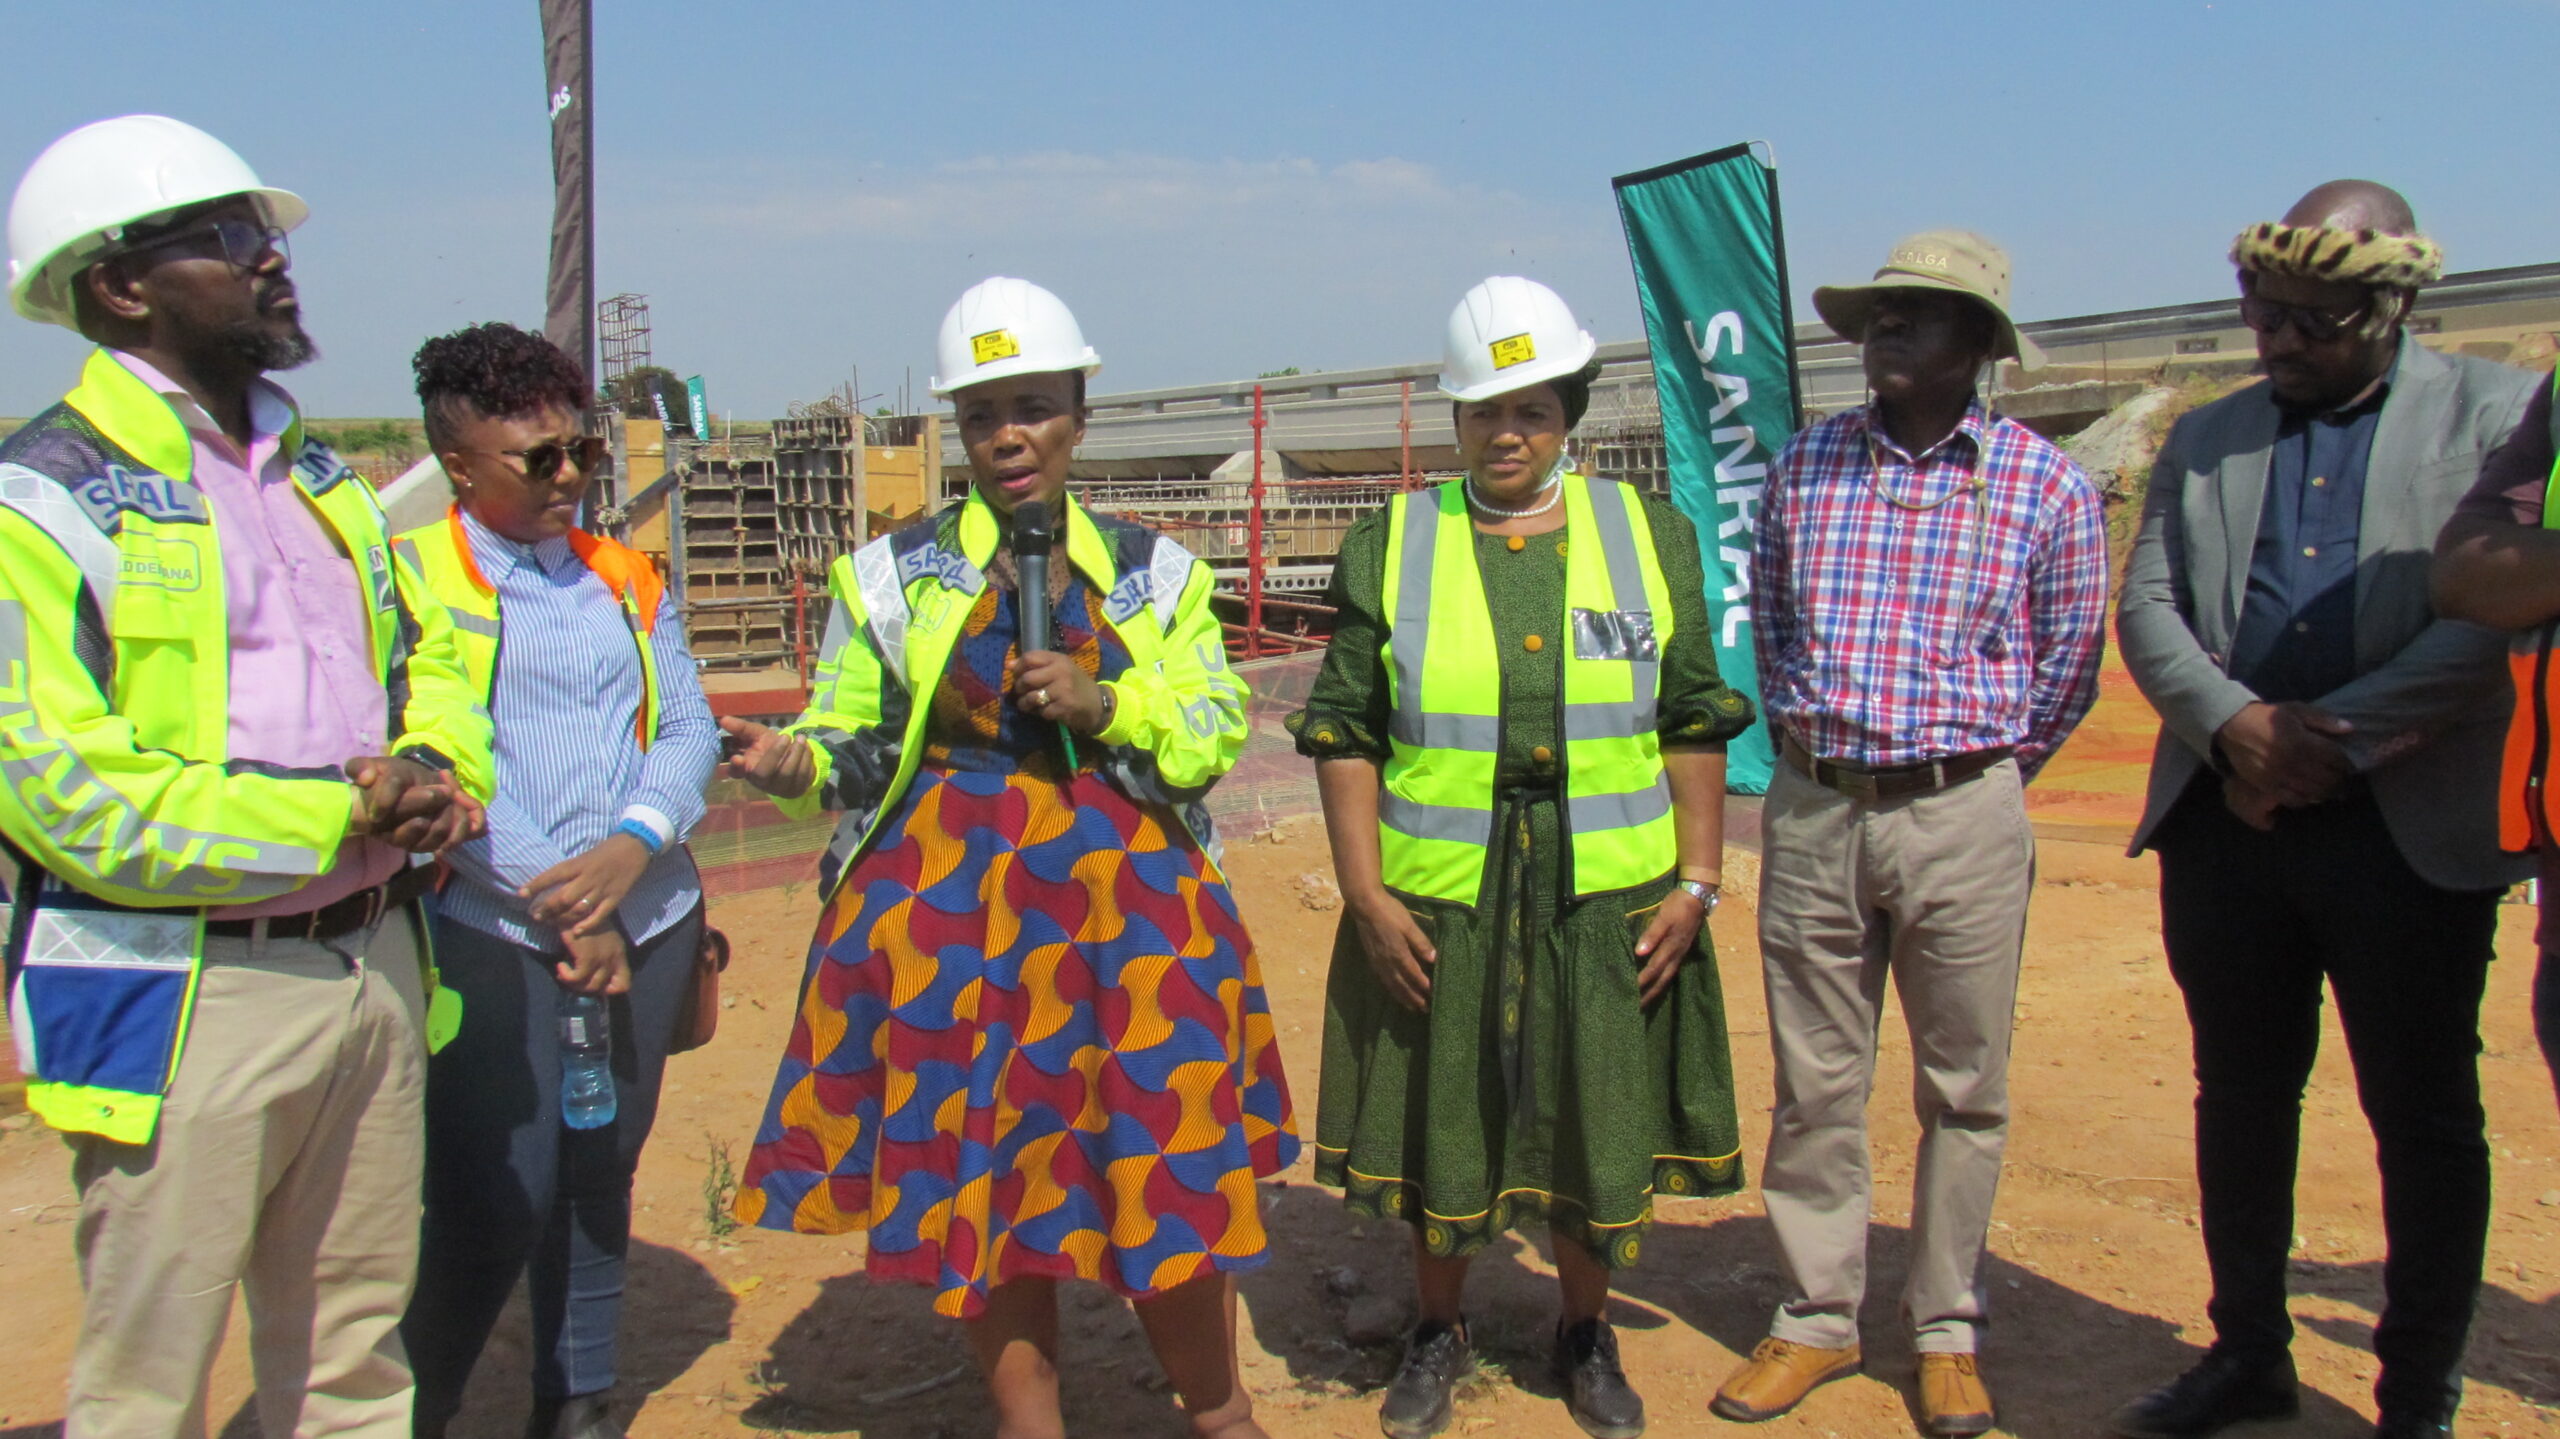 CEO of SANRAL Reginald Demana joined by Minister of Transport Sindisiwe Chikunga and projects manager, key stakeholders and officials inspecting the R573 Moloto bridge photo by Dimakatso Modipa